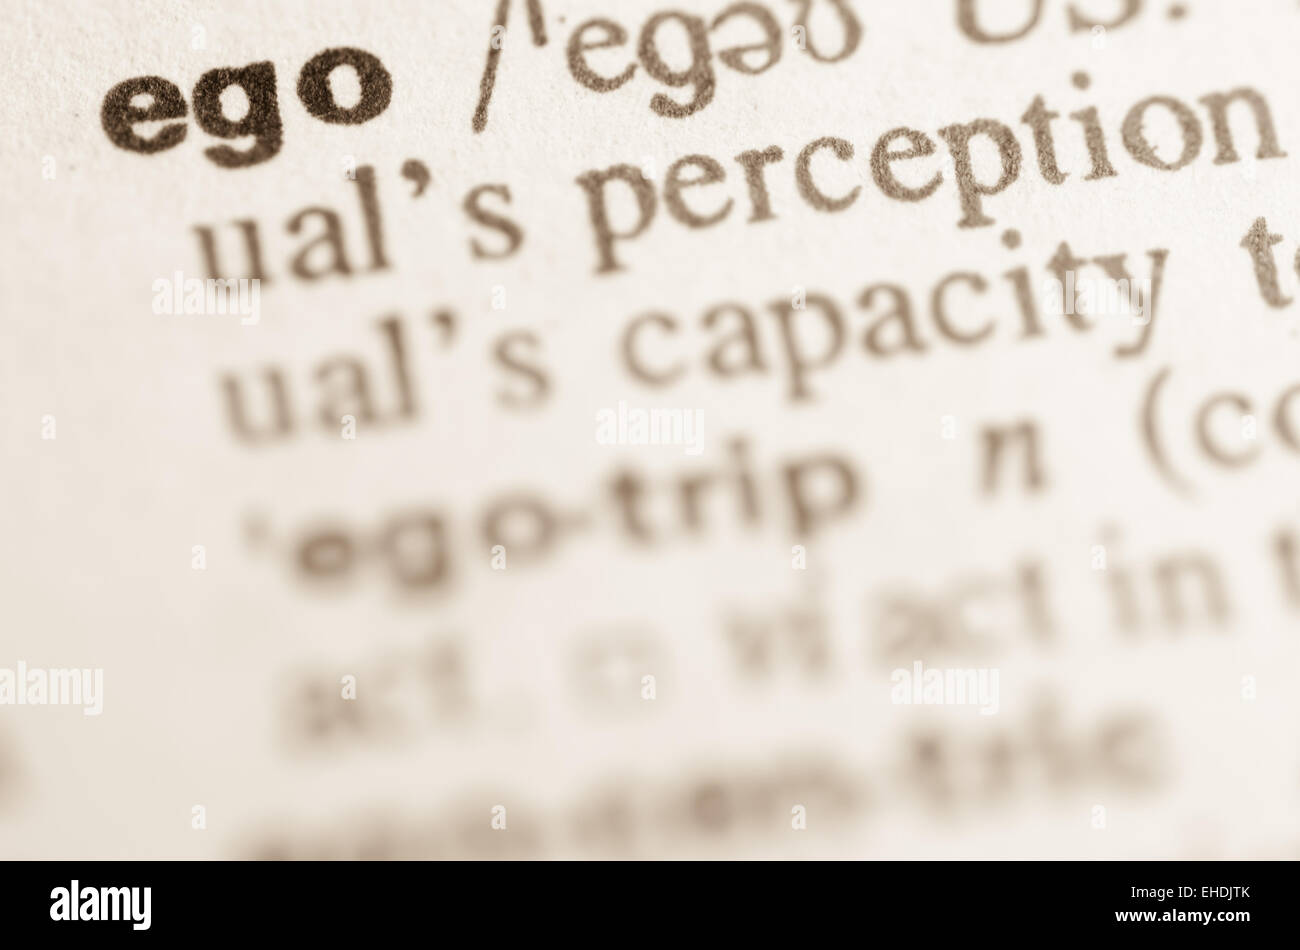 Definition of word ego in dictionary Stock Photo